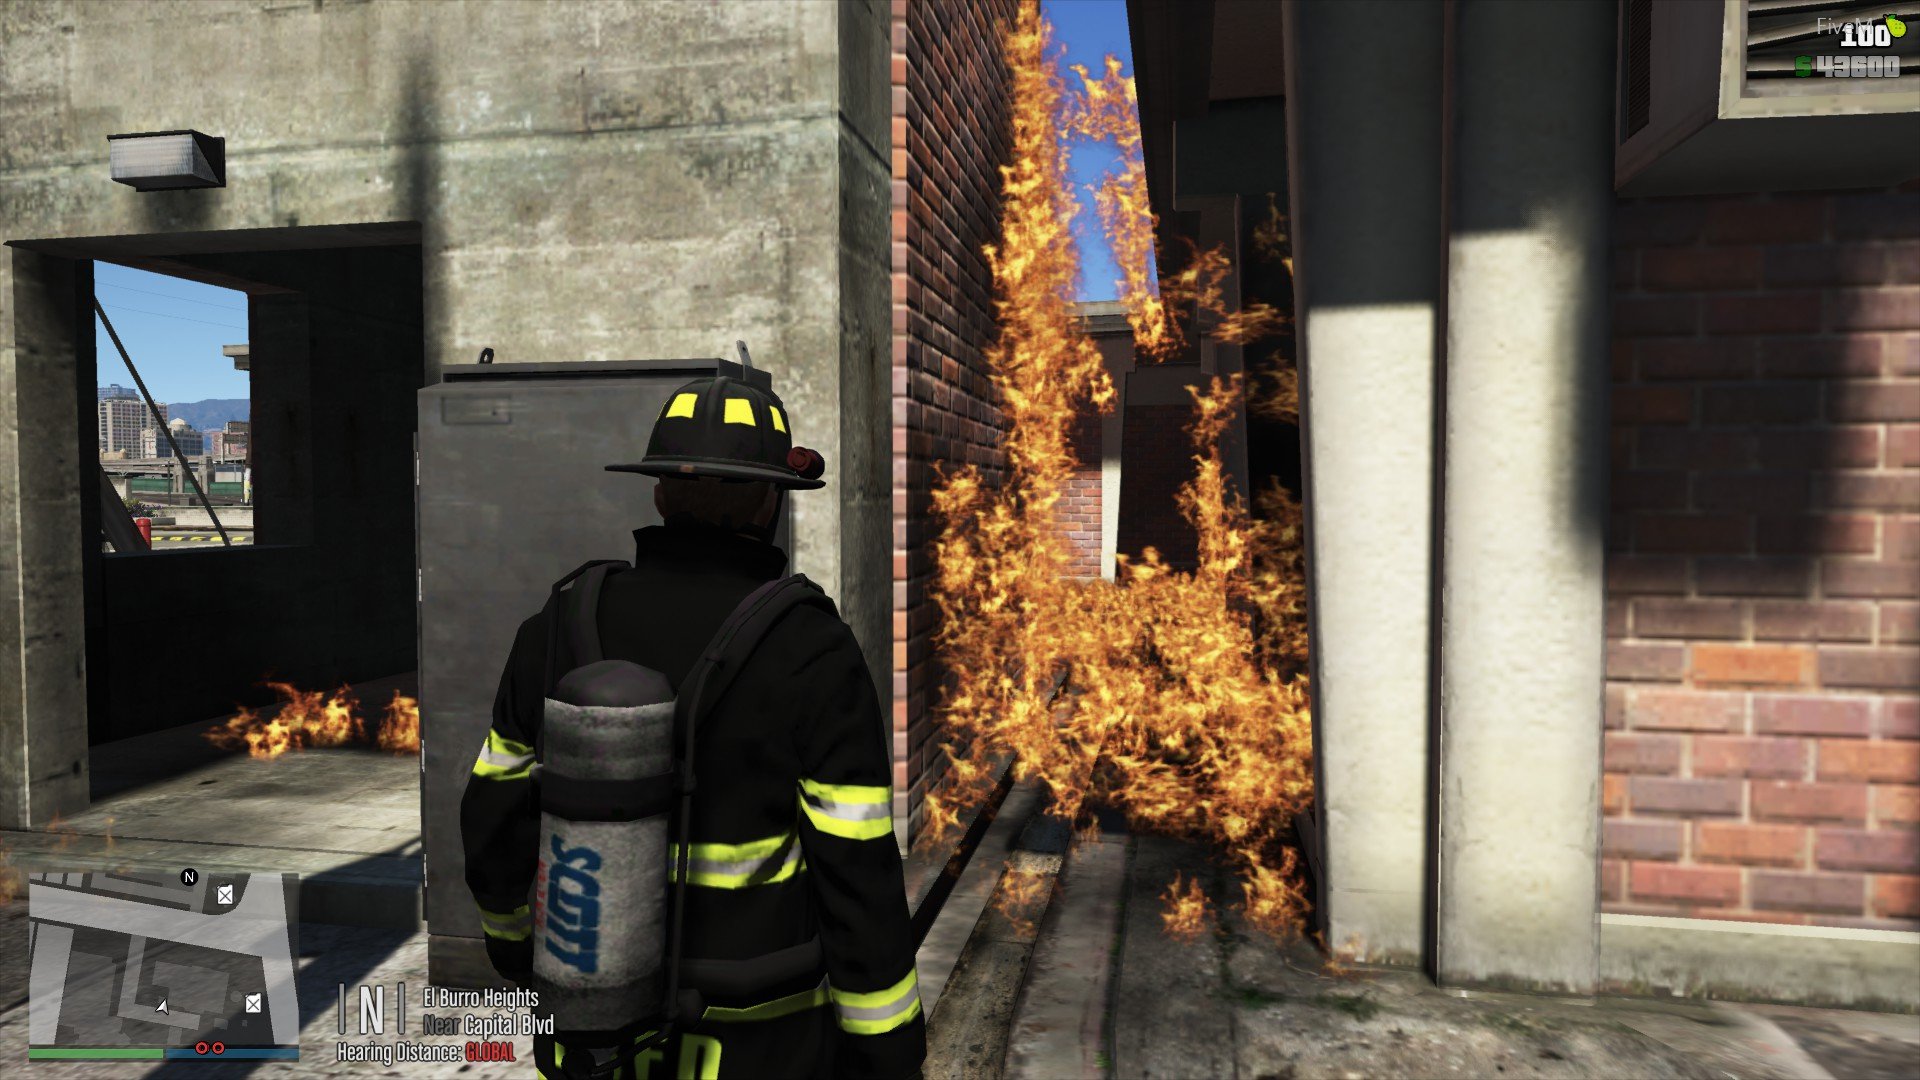 When a fire simulation goes wrong